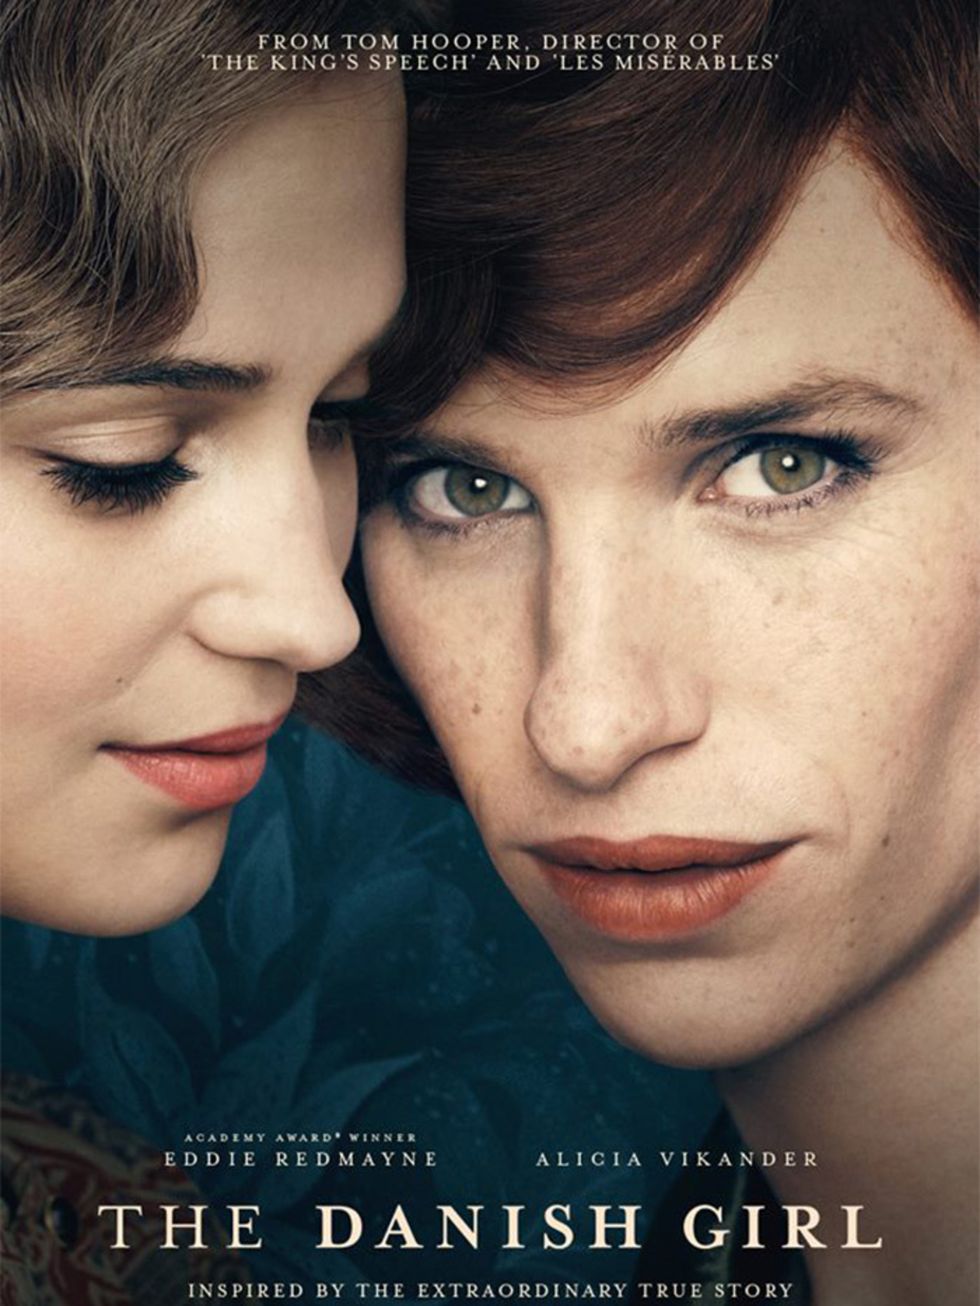 <p>FILM: The Danish Girl</p>

<p>2015 was a landmark year for awareness of transgender issues (go, Caitlyn). And so this rather gorgeous biopic of Lili Elbe, one of the first people to undergo sex-change surgery, could not be better timed. Or, for that ma